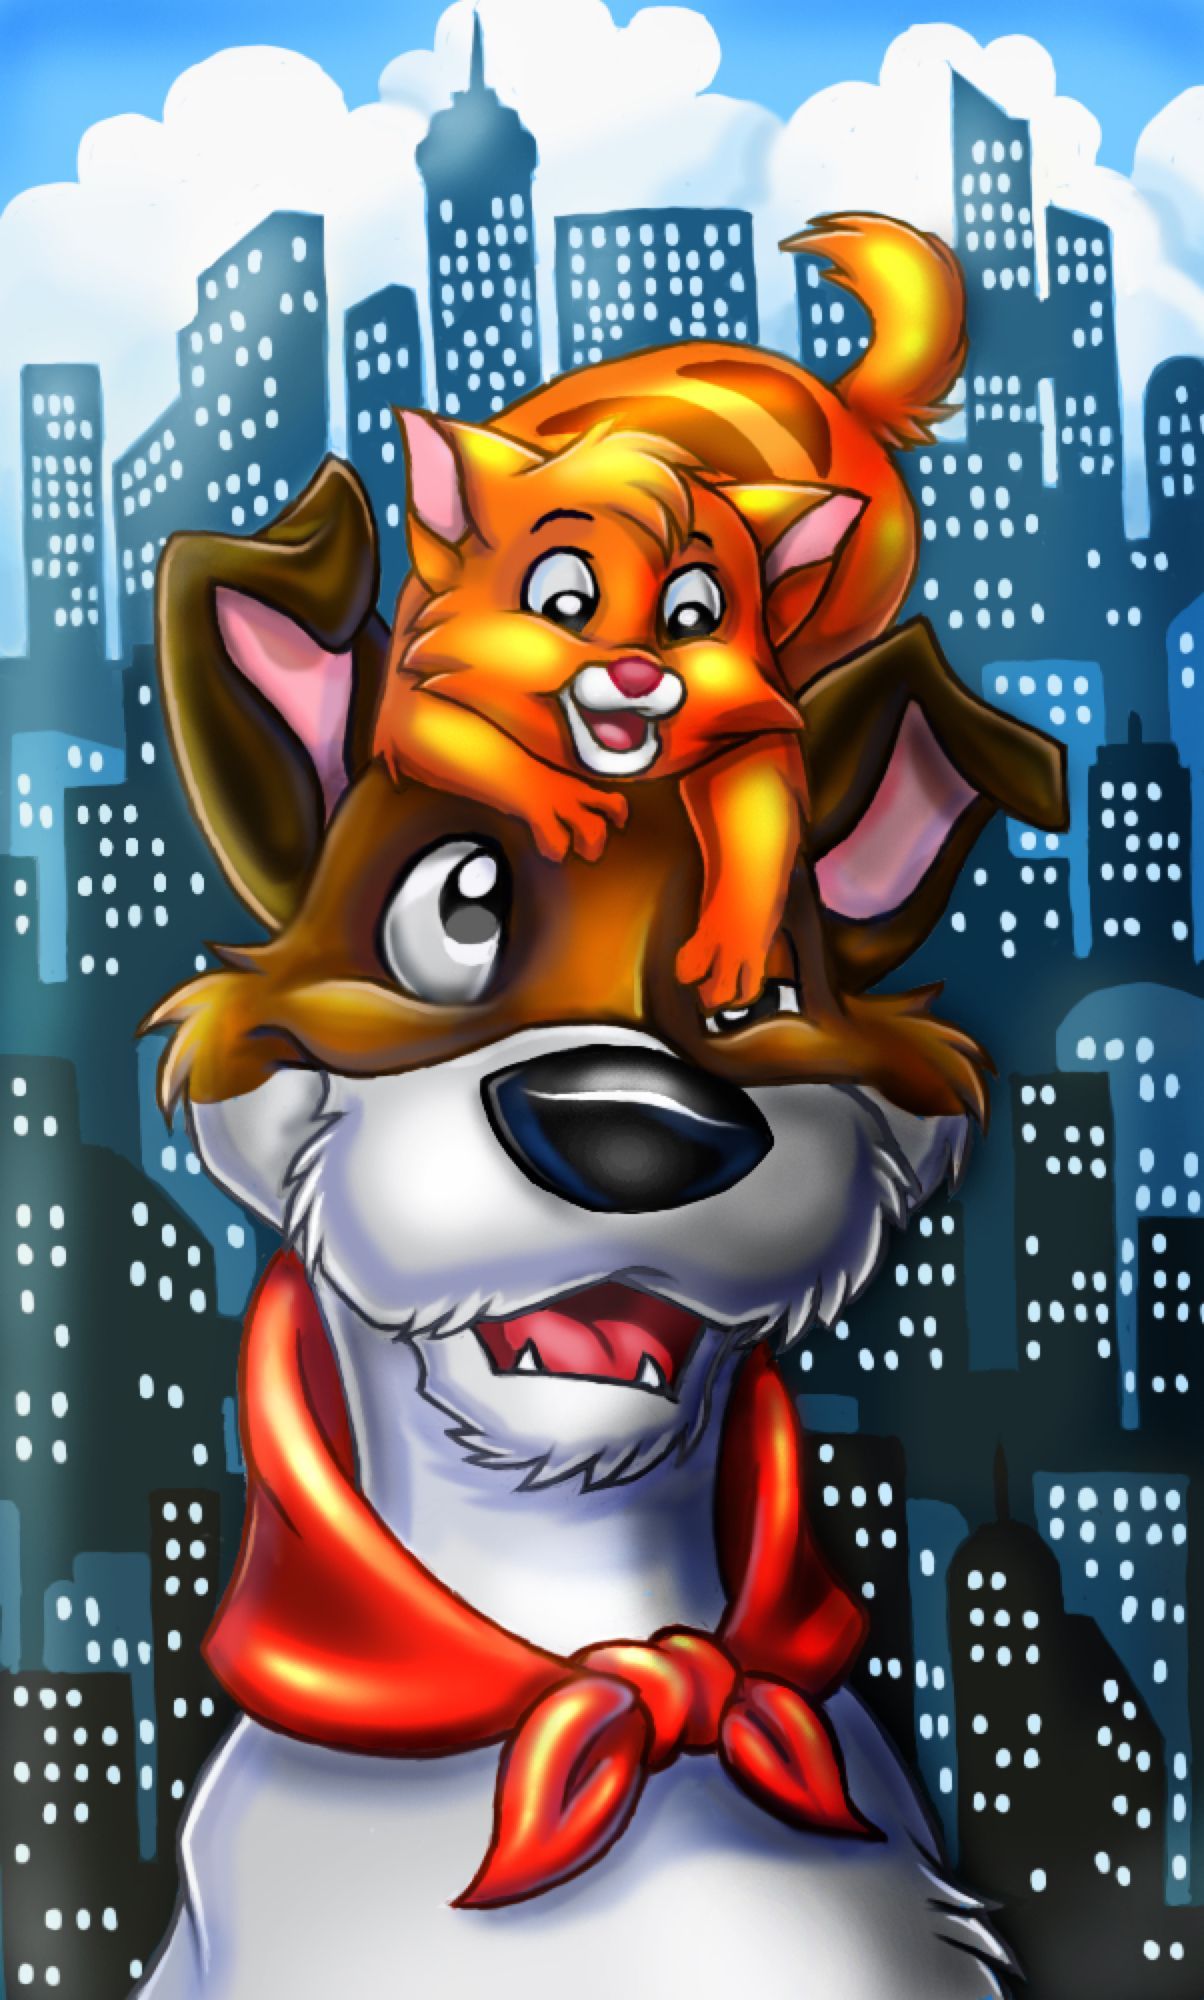 Oliver & Company ideas. oliver and company, disney, oliver